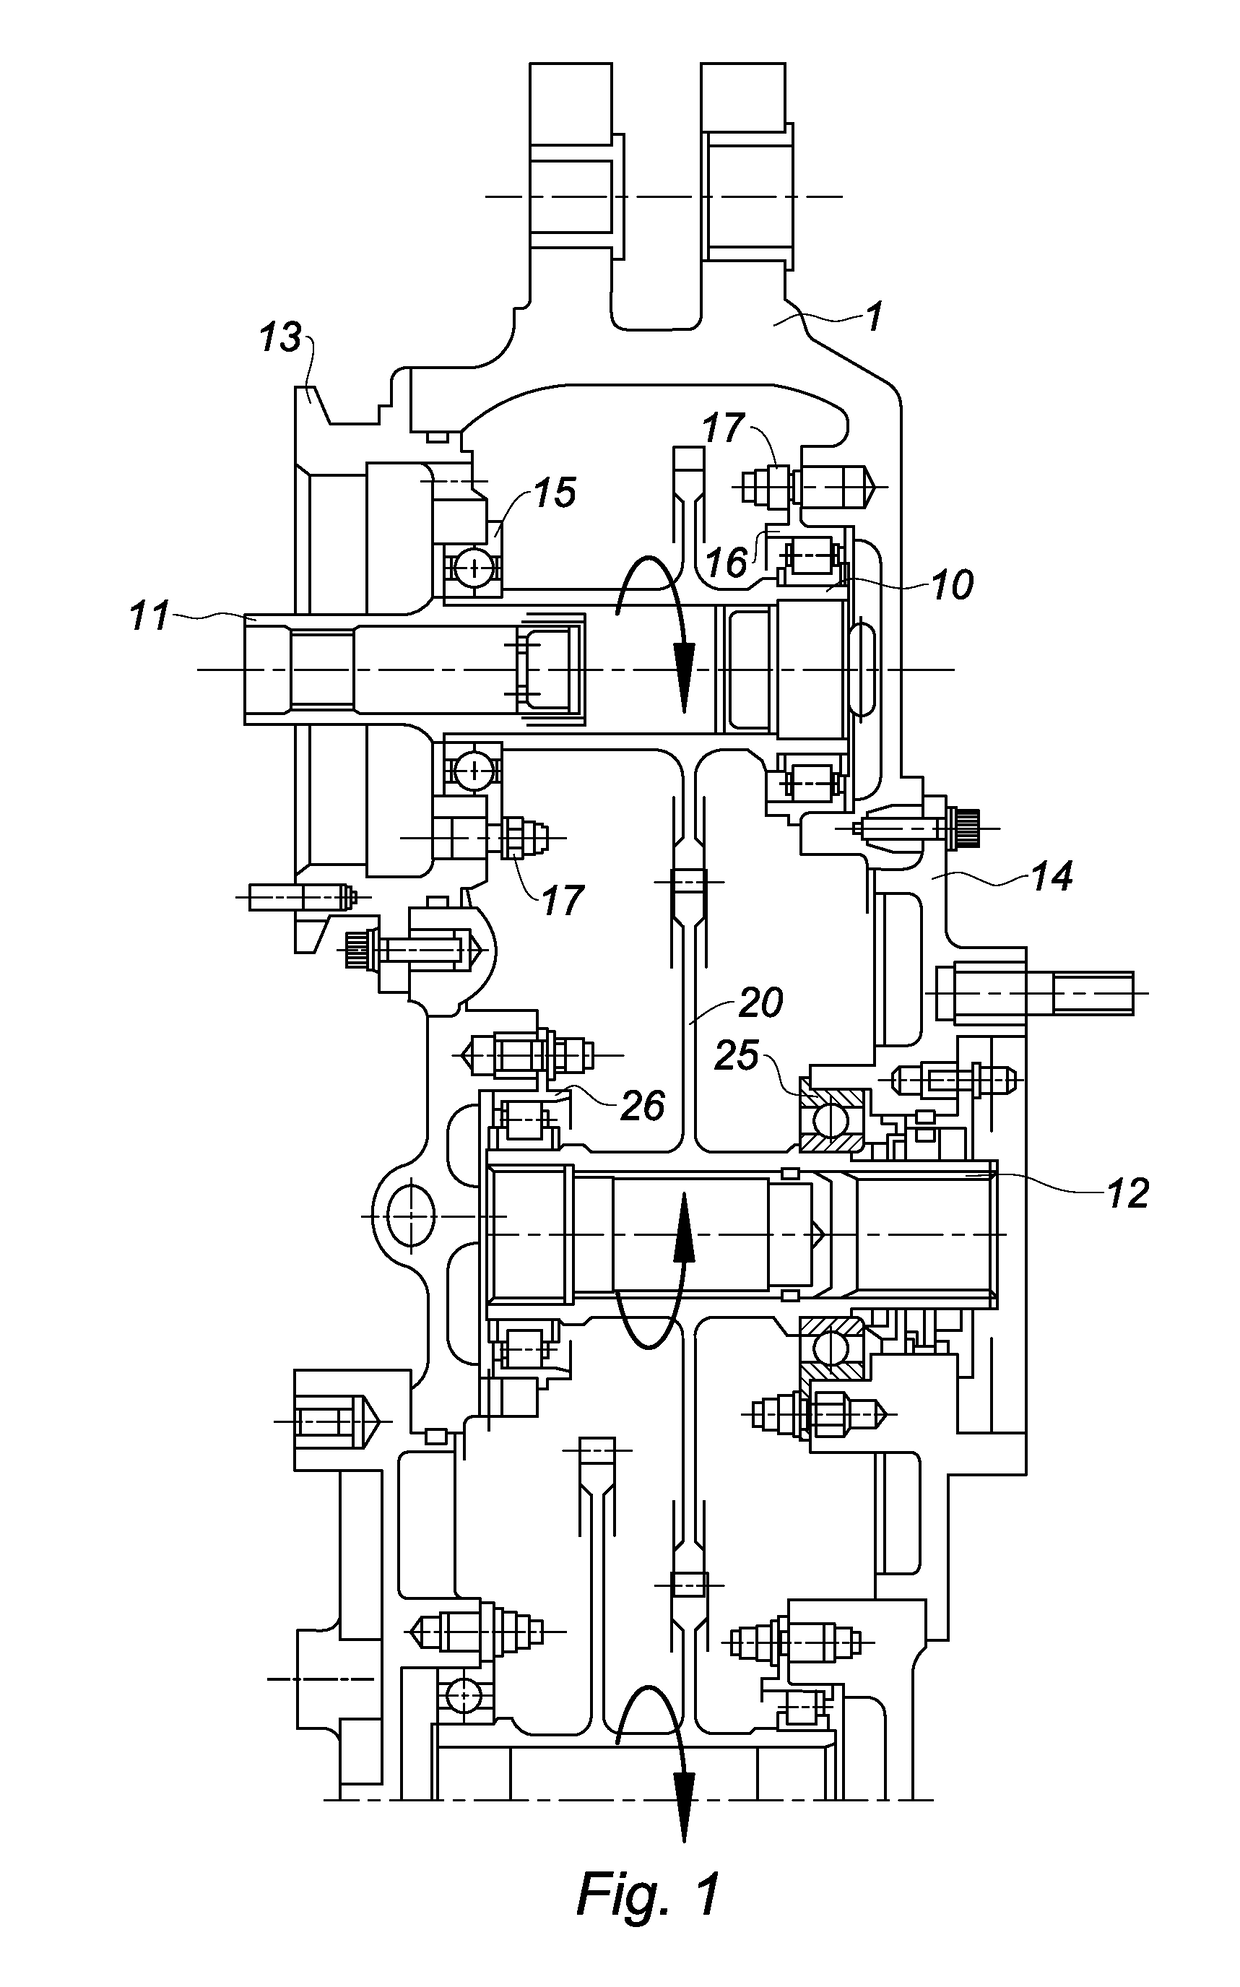 Accessory gearbox for gas turbine engine